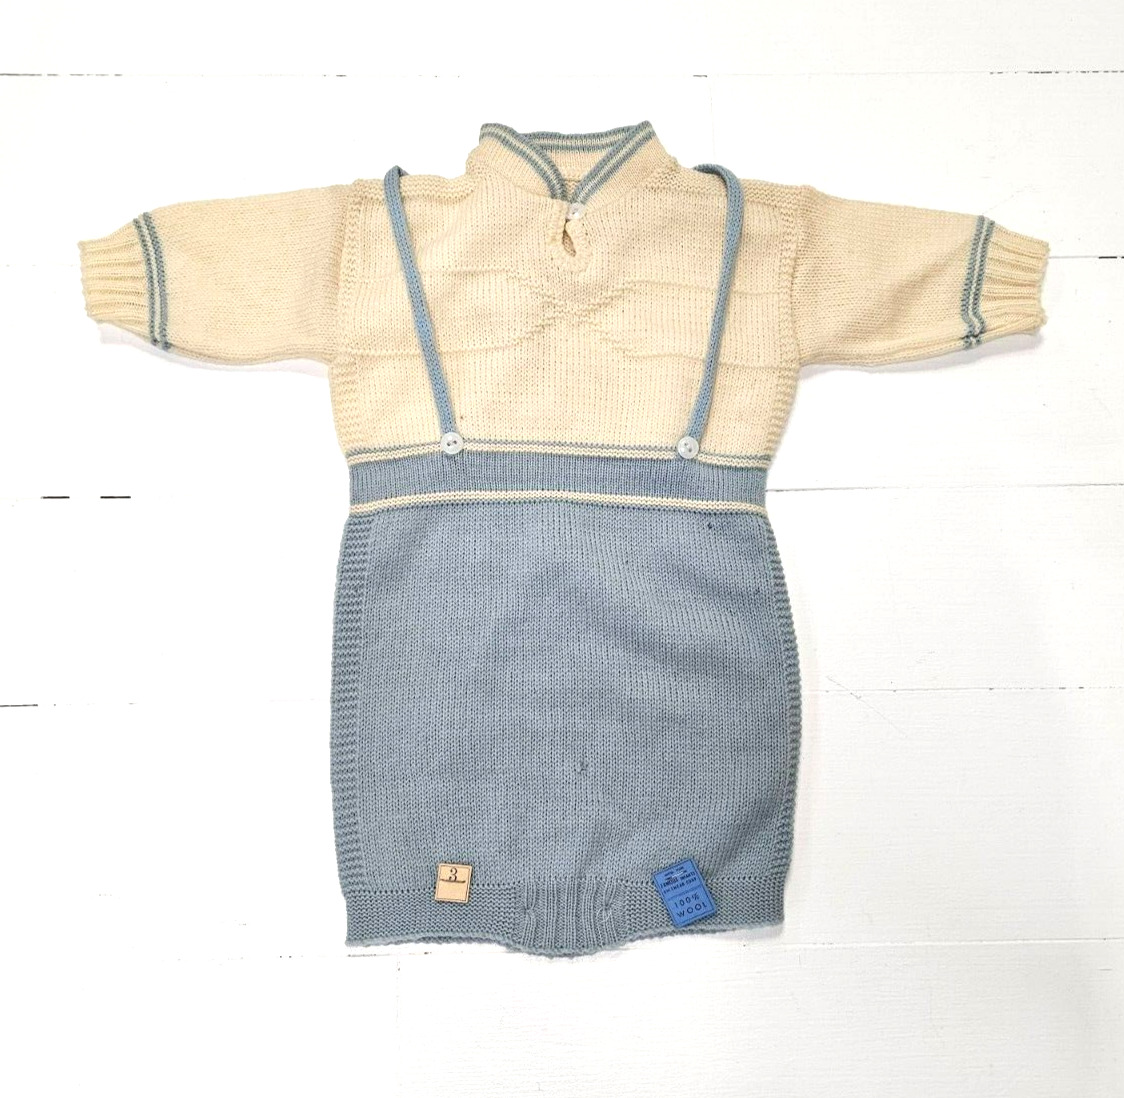 Vintage 1950\'s Baby Boy Wool Knitwear Clothing Outfit